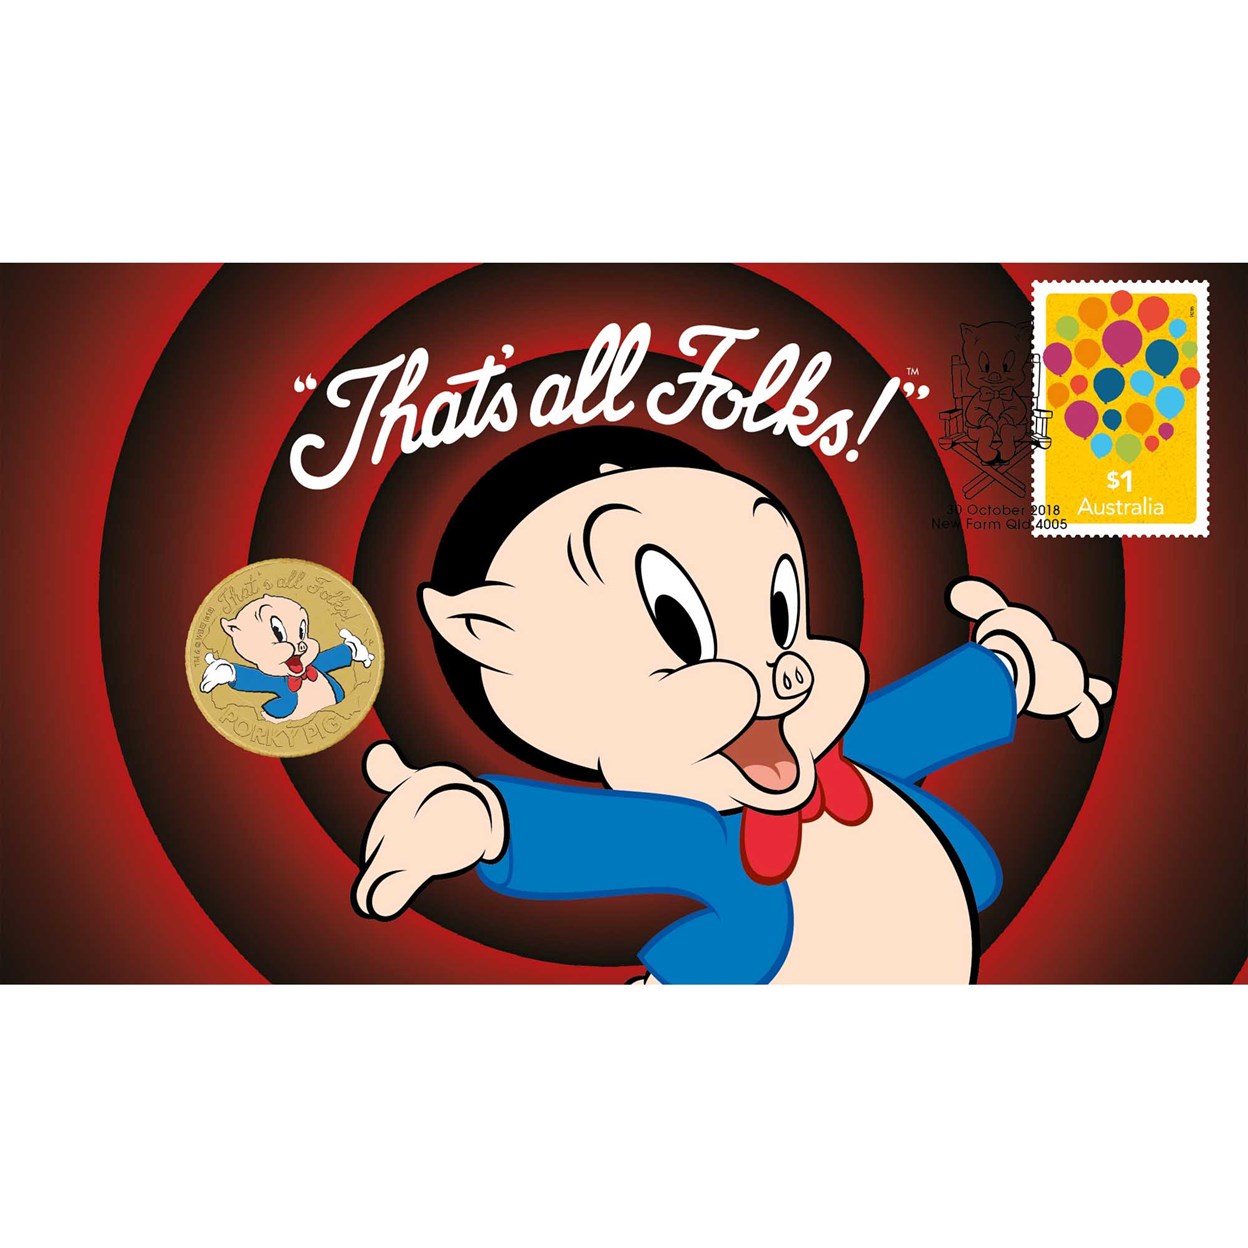 04 porky pig 2018 stamp and coin cover 2019 base metal PNC